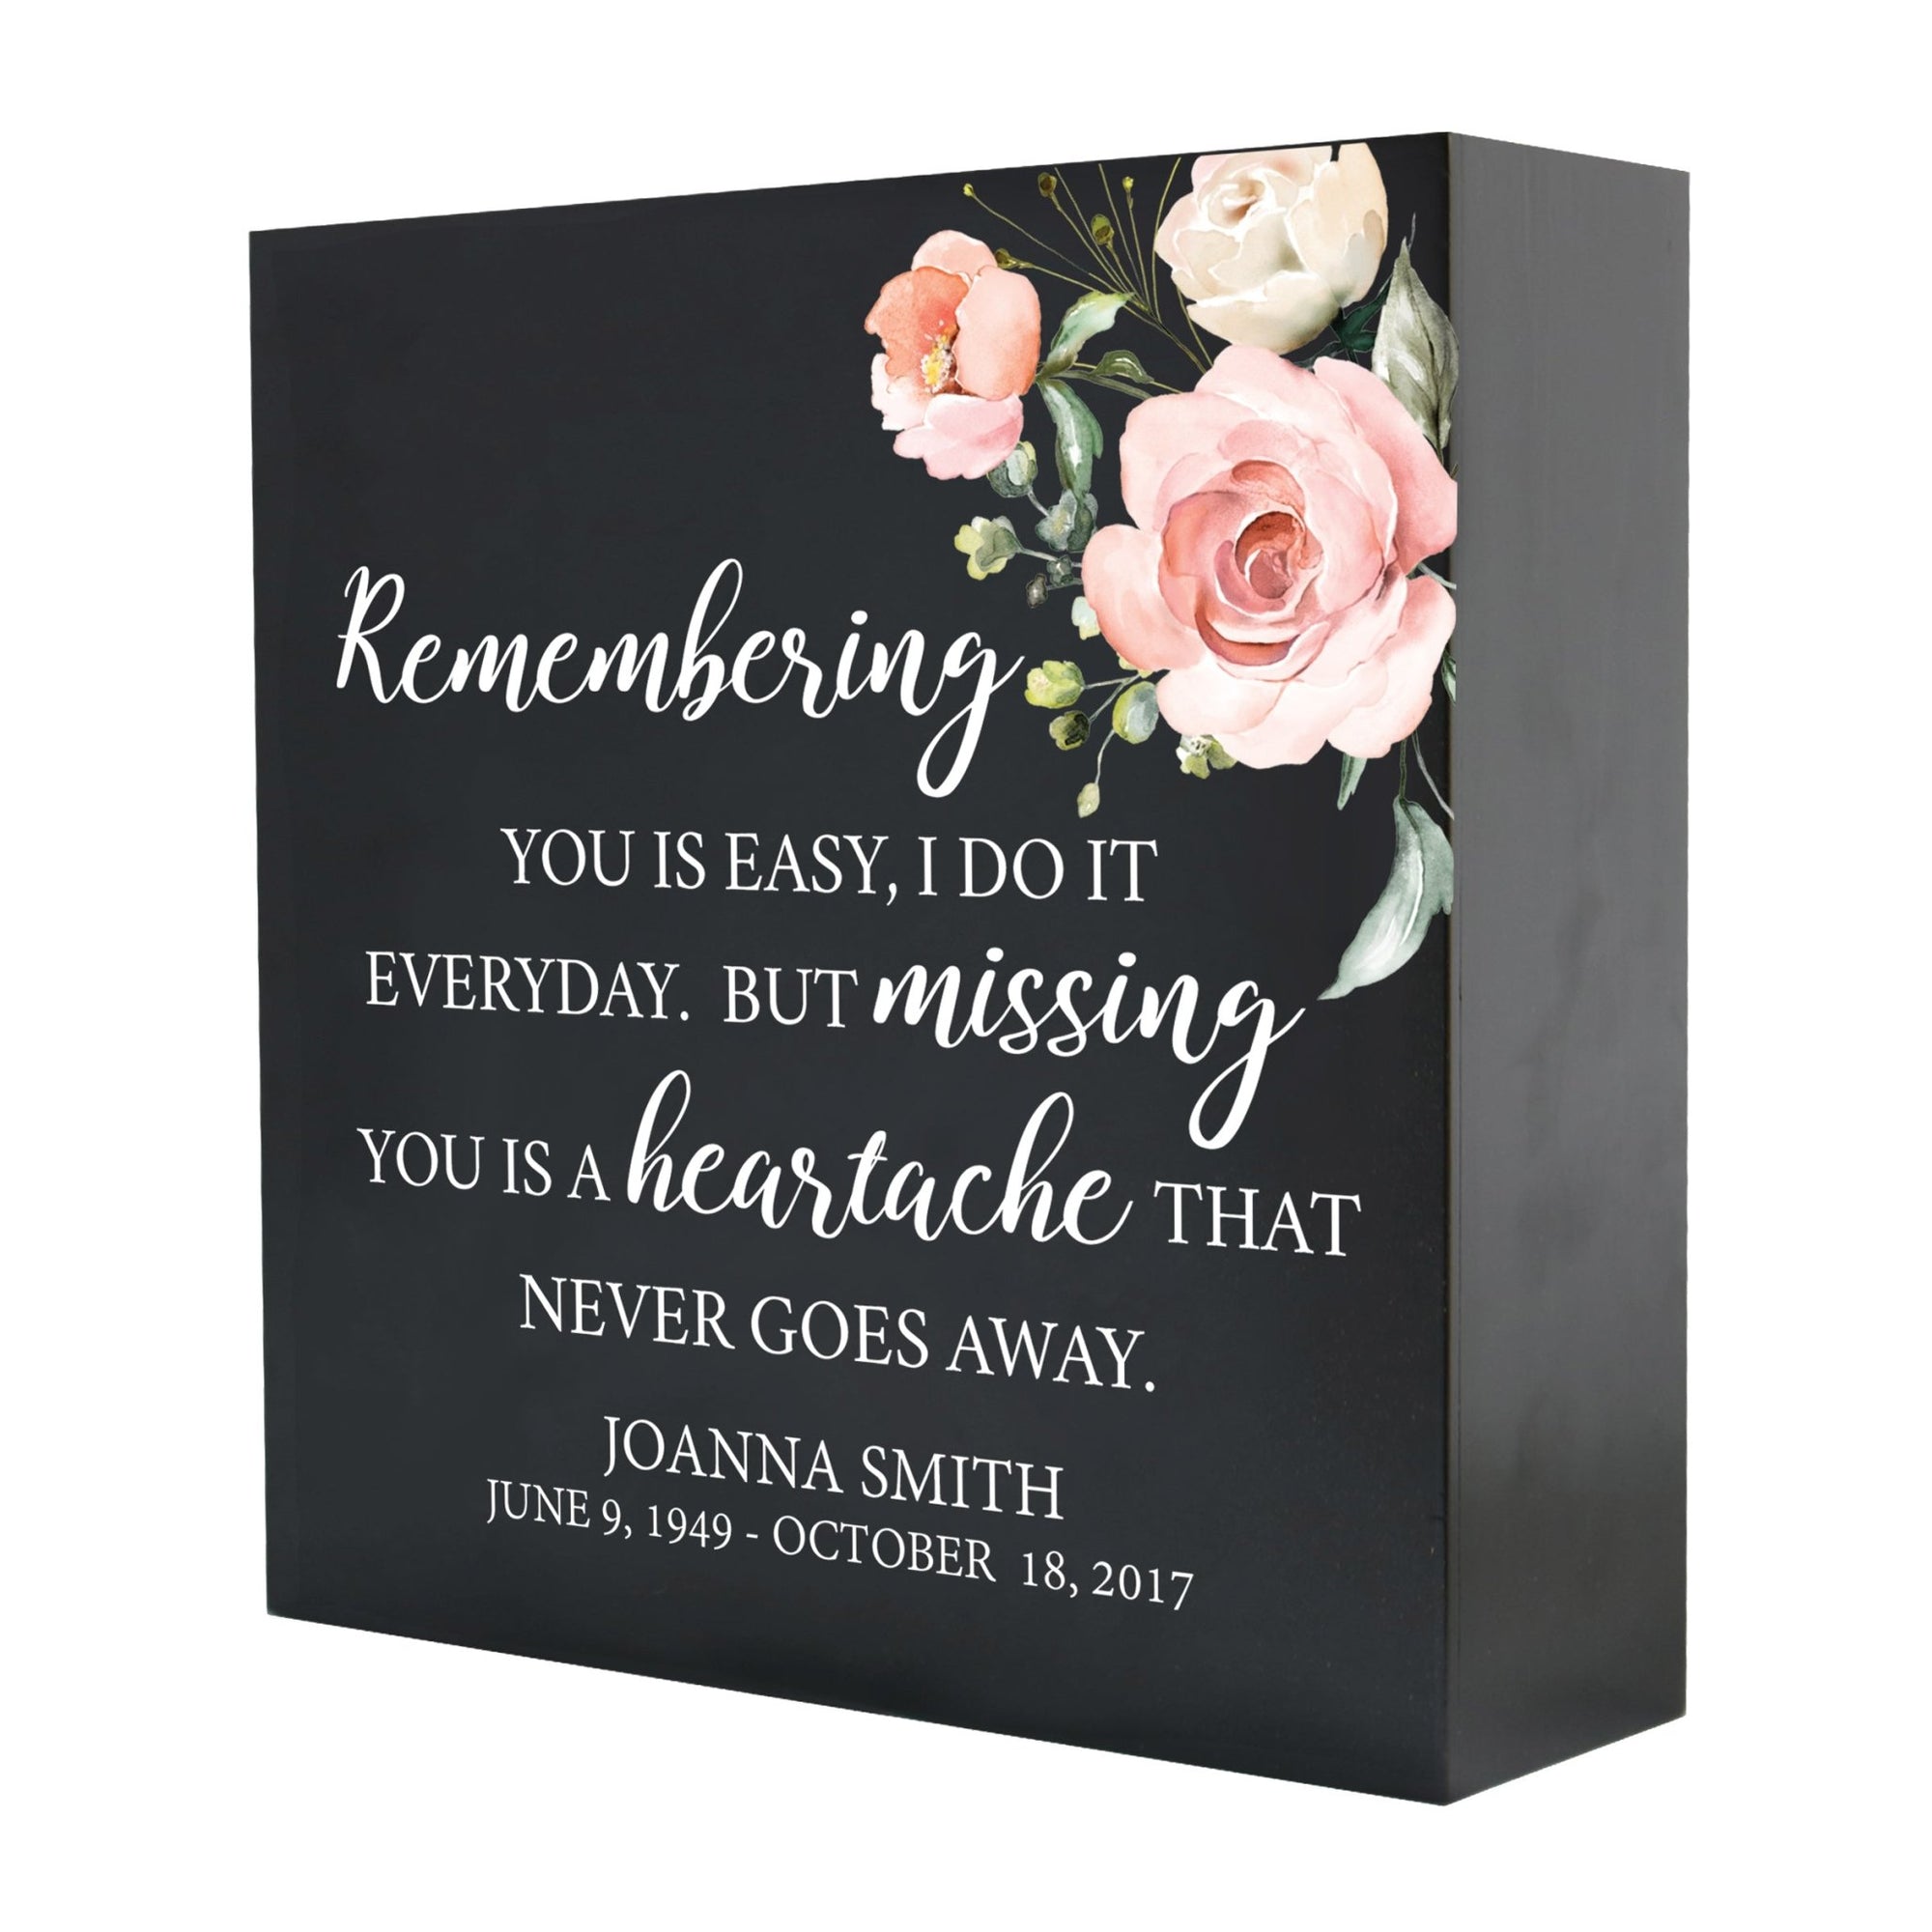 Personalized Modern Inspirational Memorial Wooden Shadow Box and Urn 10x10 holds 189 cu in of Human Ashes - Remembering You Is Easy (Missing) - LifeSong Milestones